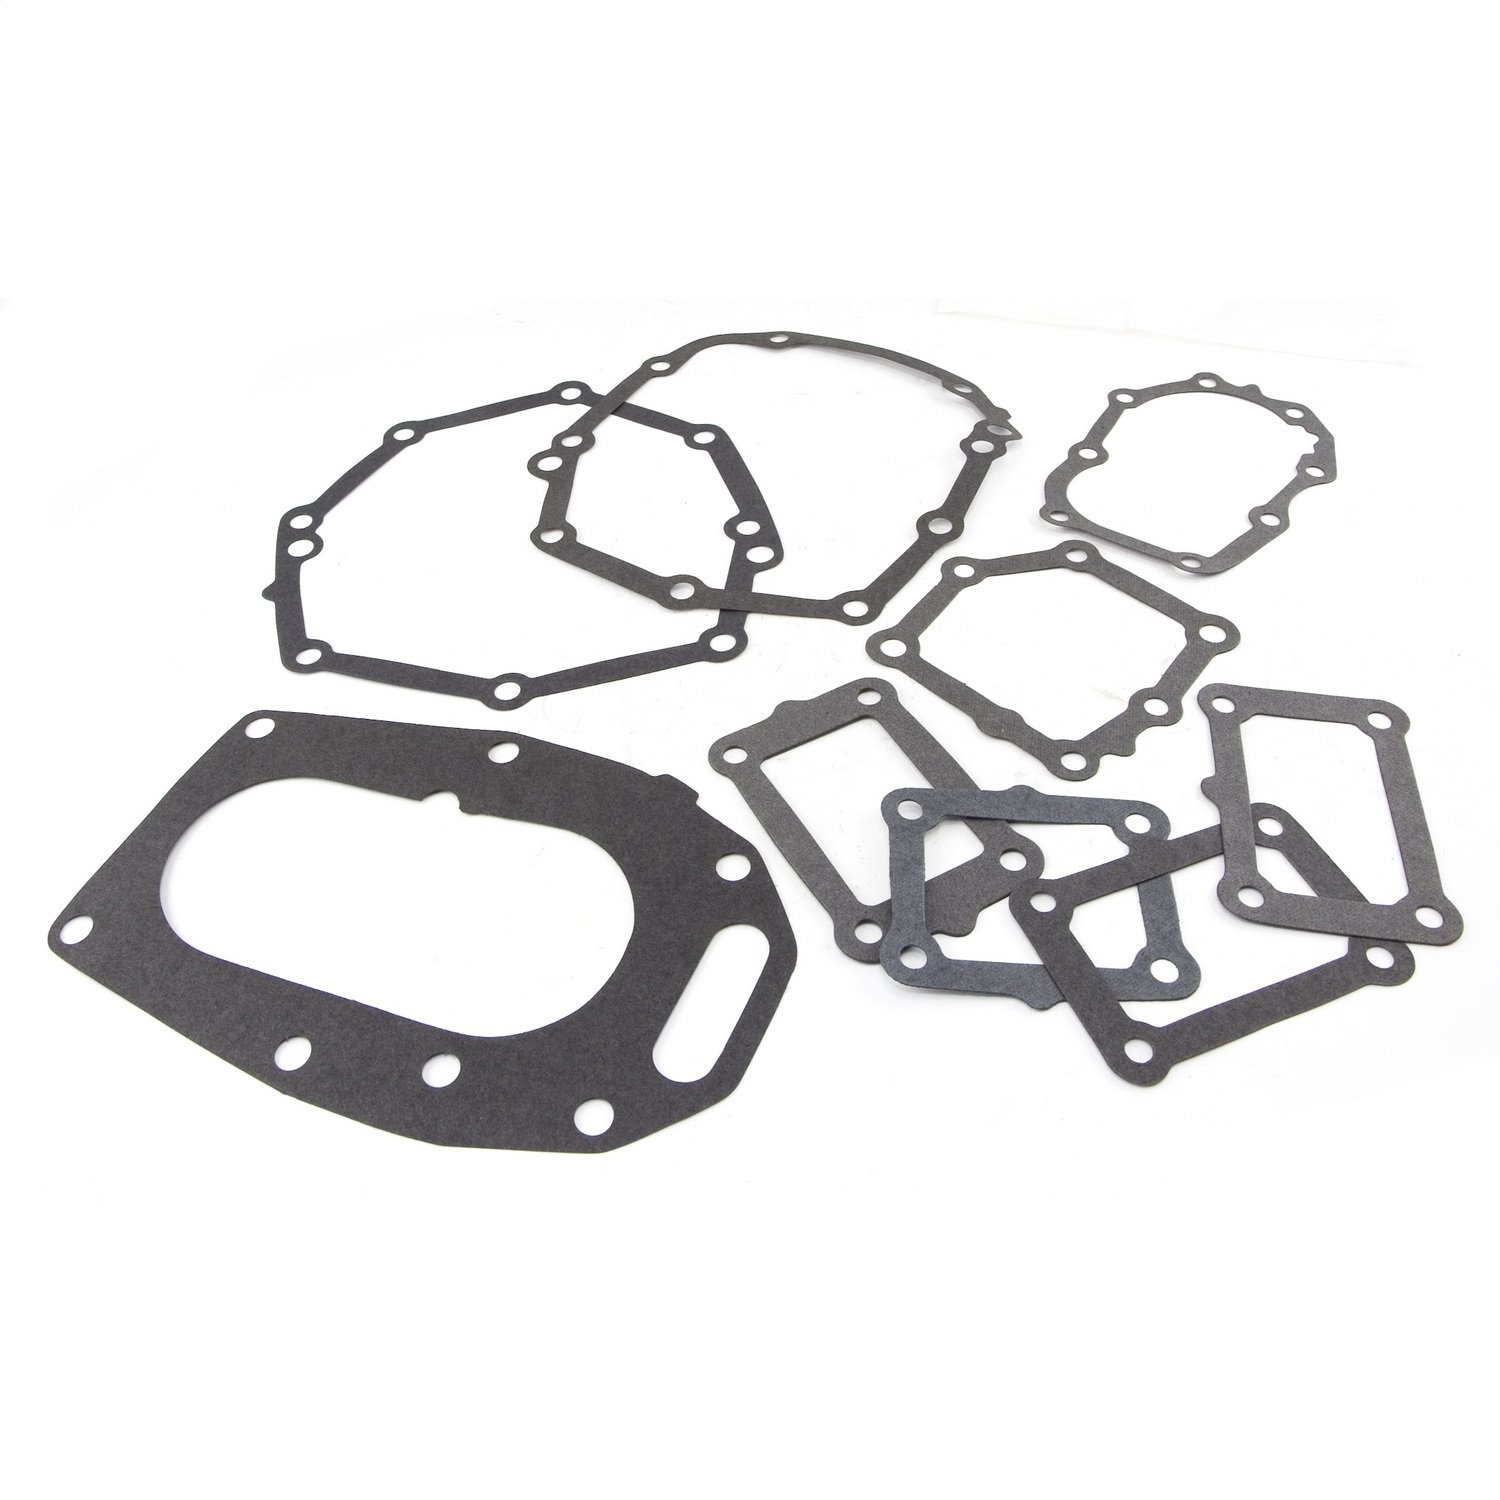 This 5-speed manual transmission seal kit from Omix-ADA fits 84-01 Jeep Cherokees and Wrangler with